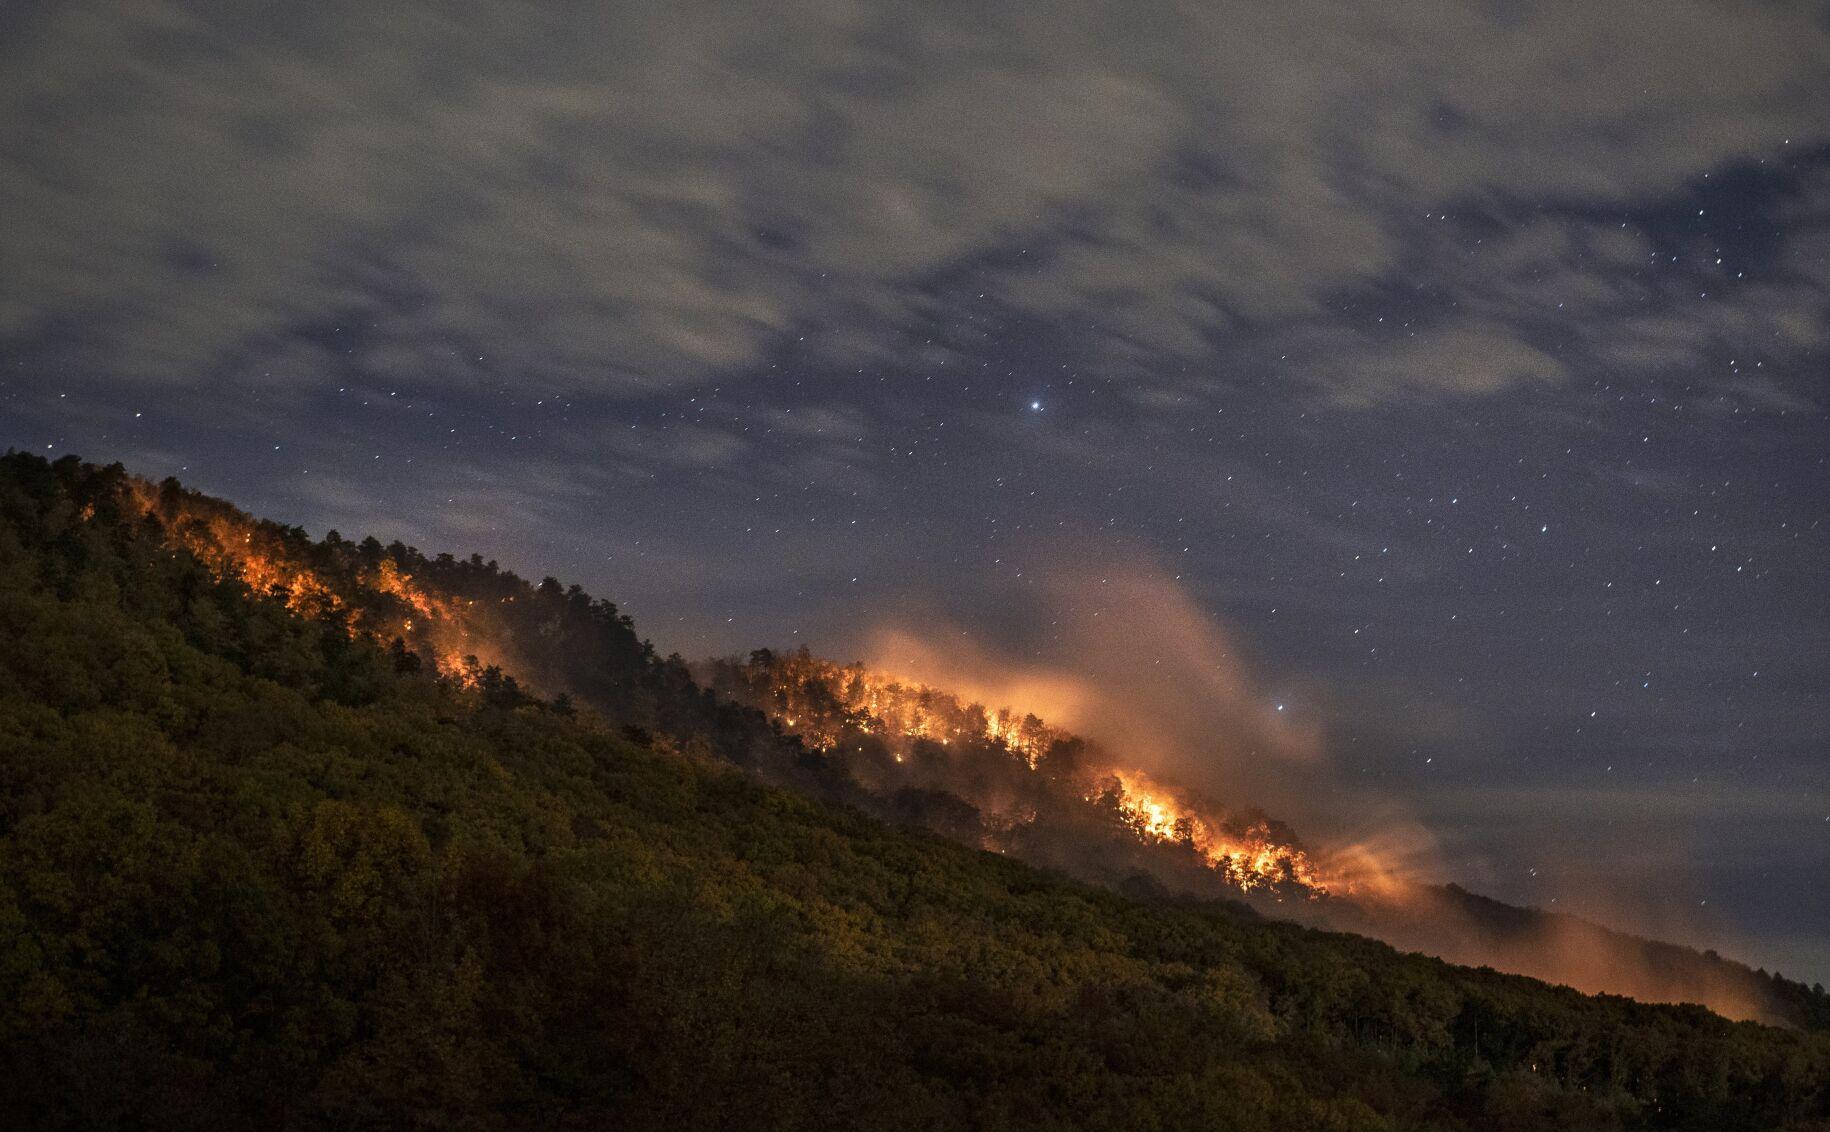 The fire on Sauratown Mountain in Stokes County has now burned 15 acres